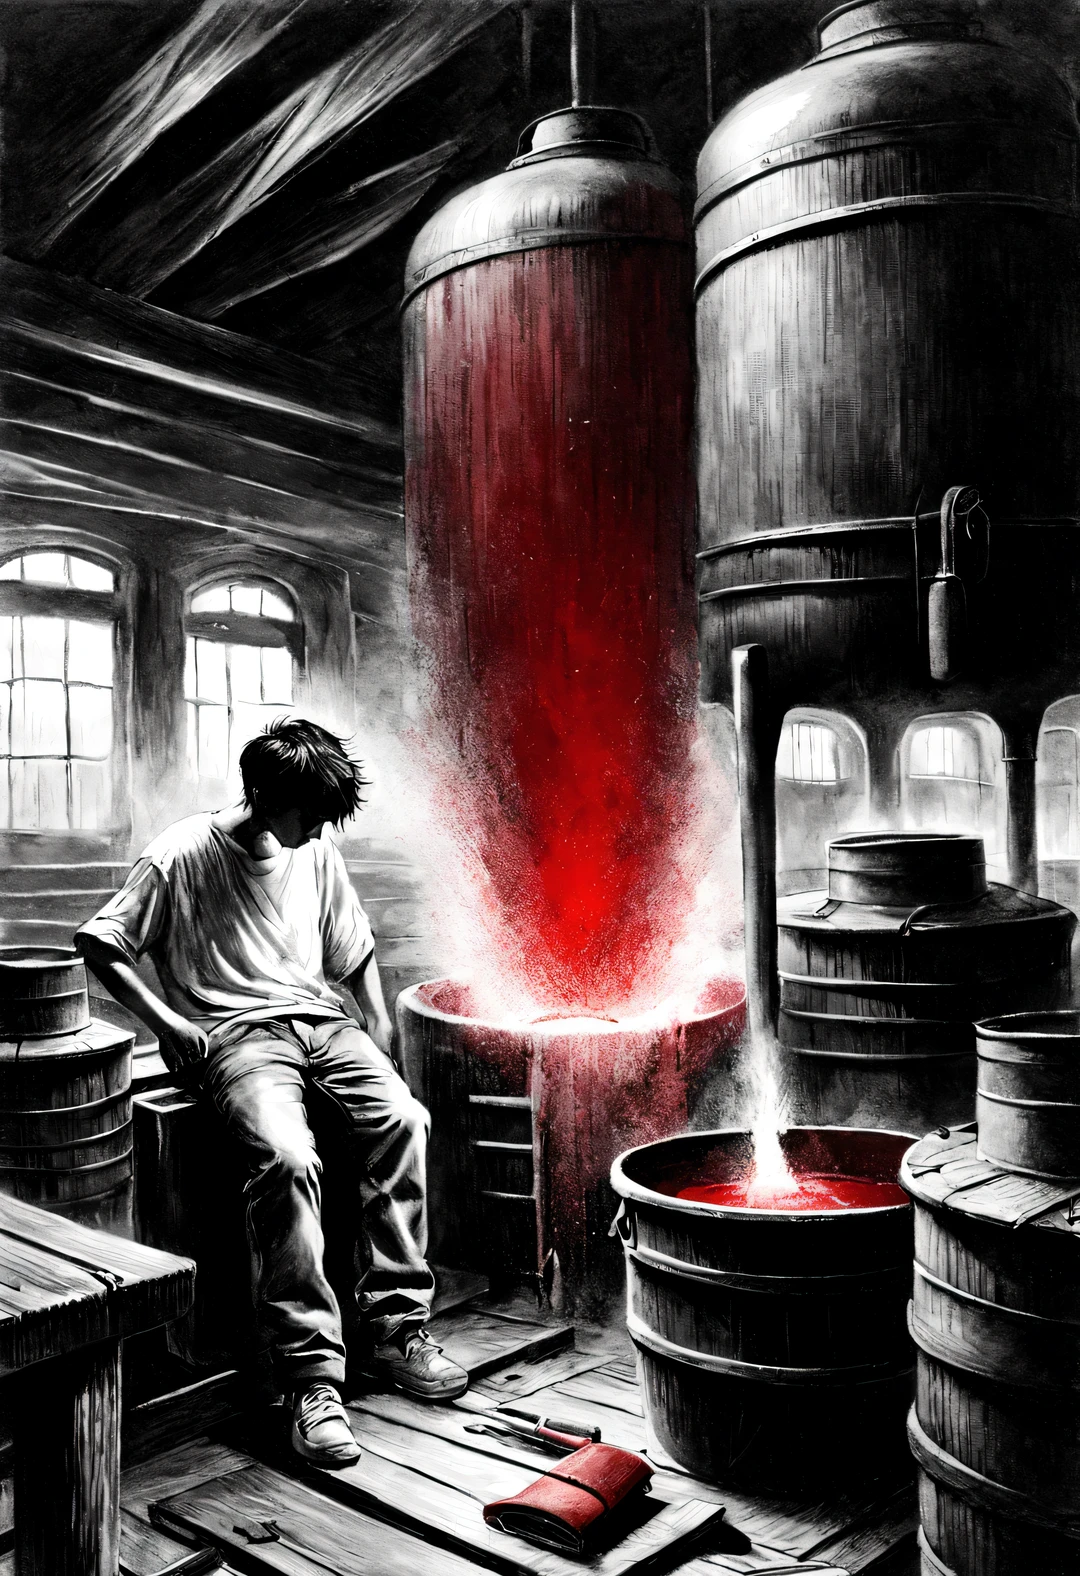 (Graphite painting), (A big old iron pot is boiling red water in the basement), There was a boy next to him, (There is a huge knife stuck in the broken iron pot: 1.2), (The boy stares at the cauldron: 0.9), (Wearing a white crew neck shirt and jeans), Rugged and curly short), decadent and lazy, (perfect face), sports shoes, (Industrial lights on the roof emit a dim, weak red light: 1.34),
background: many, Many old bottles and glasses flew in the basement, The walls are tattered, industrial style, retro shabby,
90's anime style, Bold silhouettes, Graphic arts, line art, black and white, line art with pen pressure, Pen pressure sketch, Calligraphy pen with pen pressure, G pen style，With pen pressure, Hand drawn thick lines, high contrast, ig model,